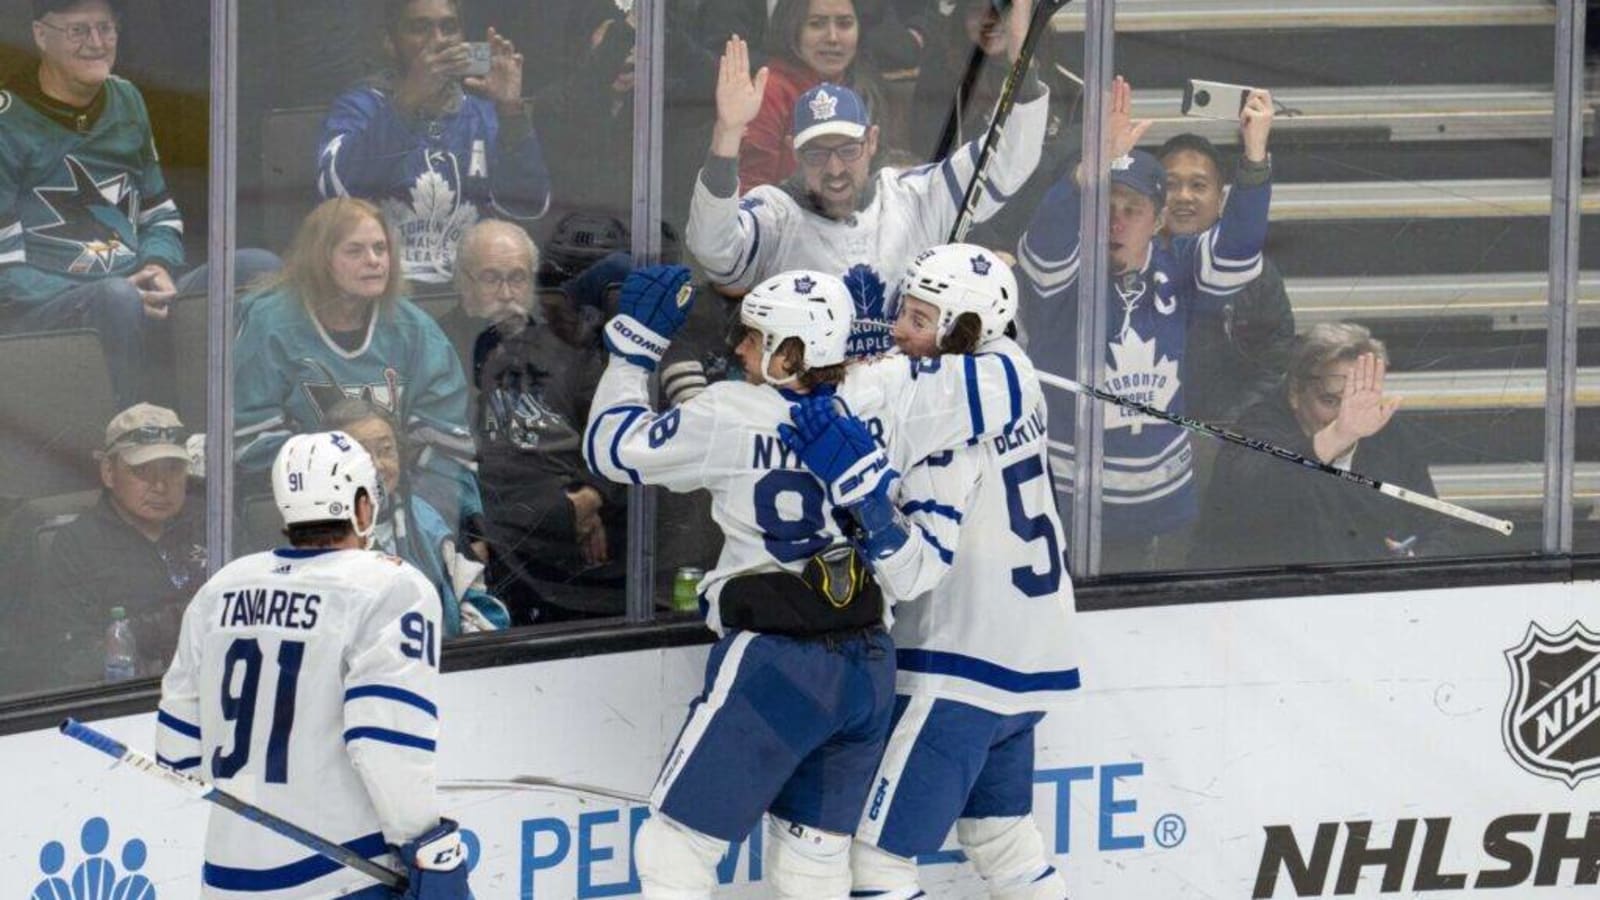 NHL News: William Nylander signs an eight-year extension with the Toronto Maple Leafs | Yardbarker